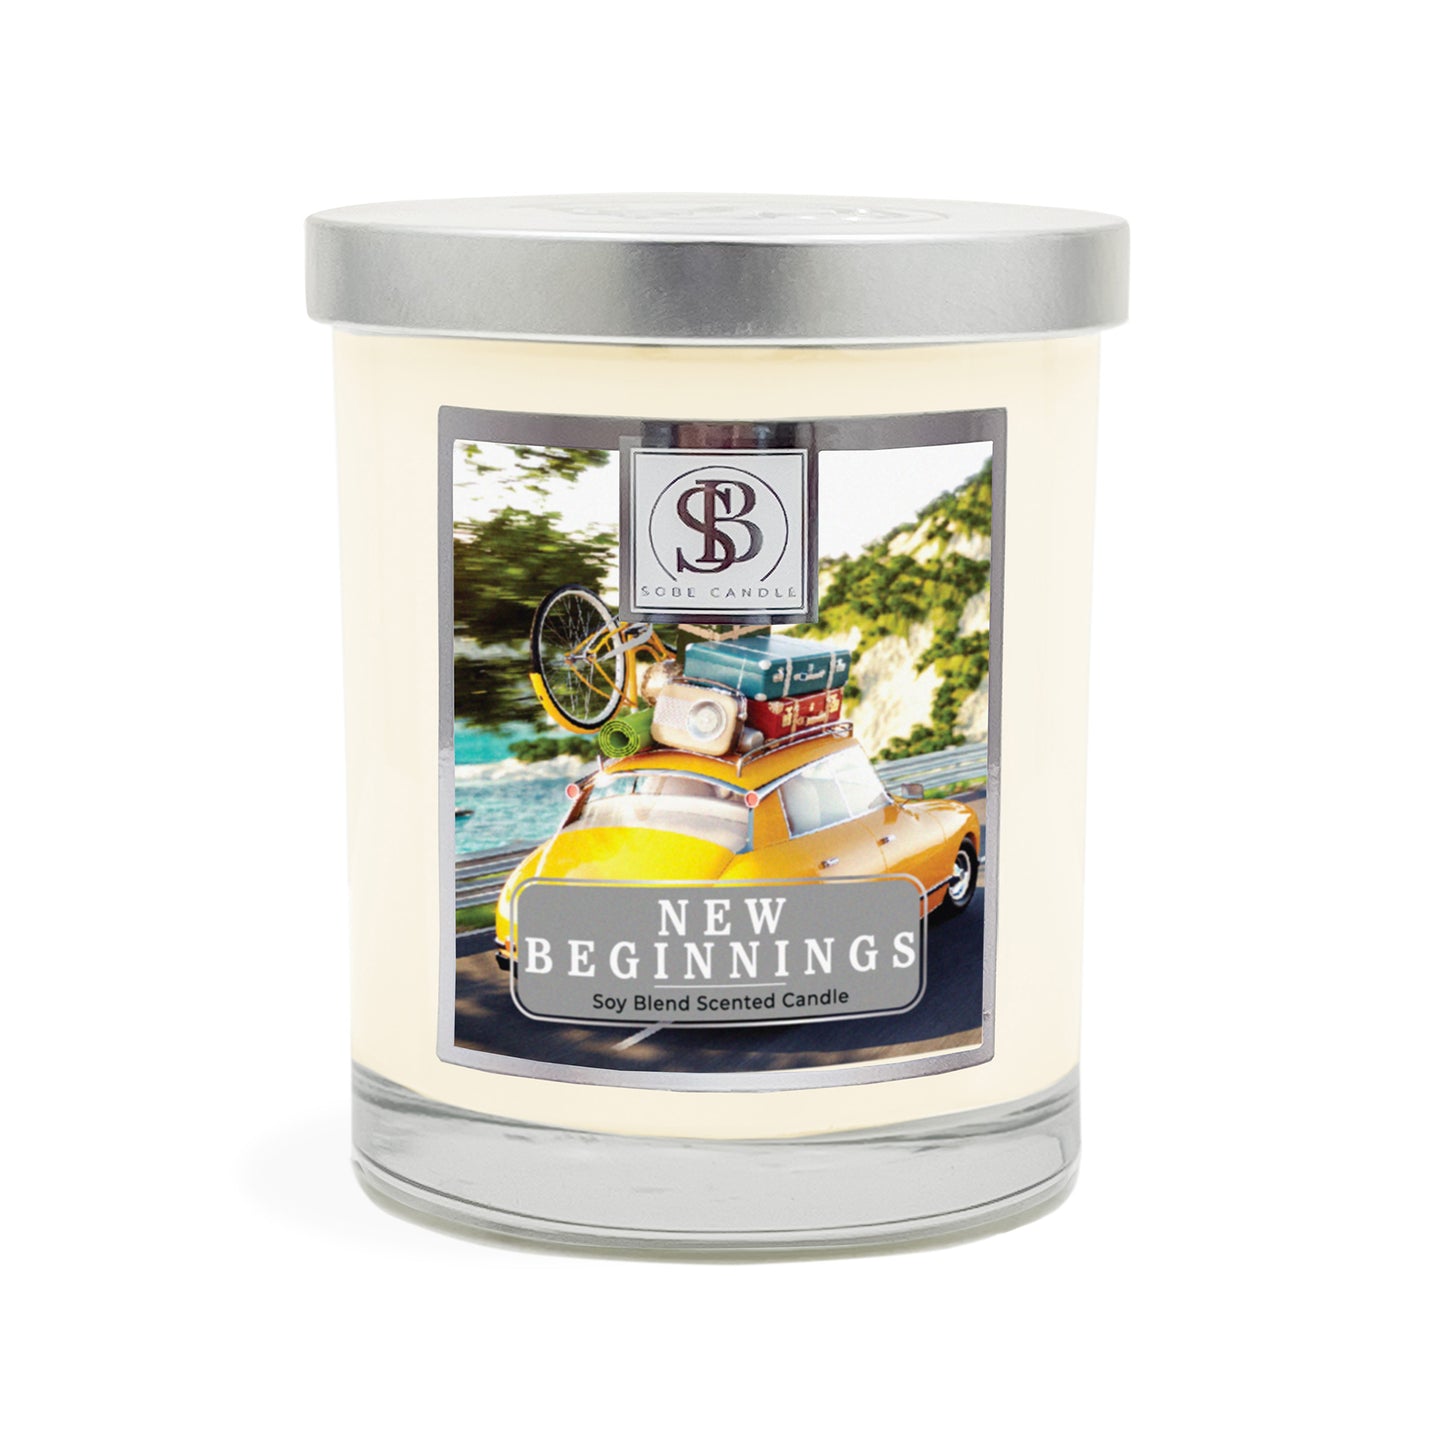 NEW BEGINNINGS | Soy Scented Candle 11 oz